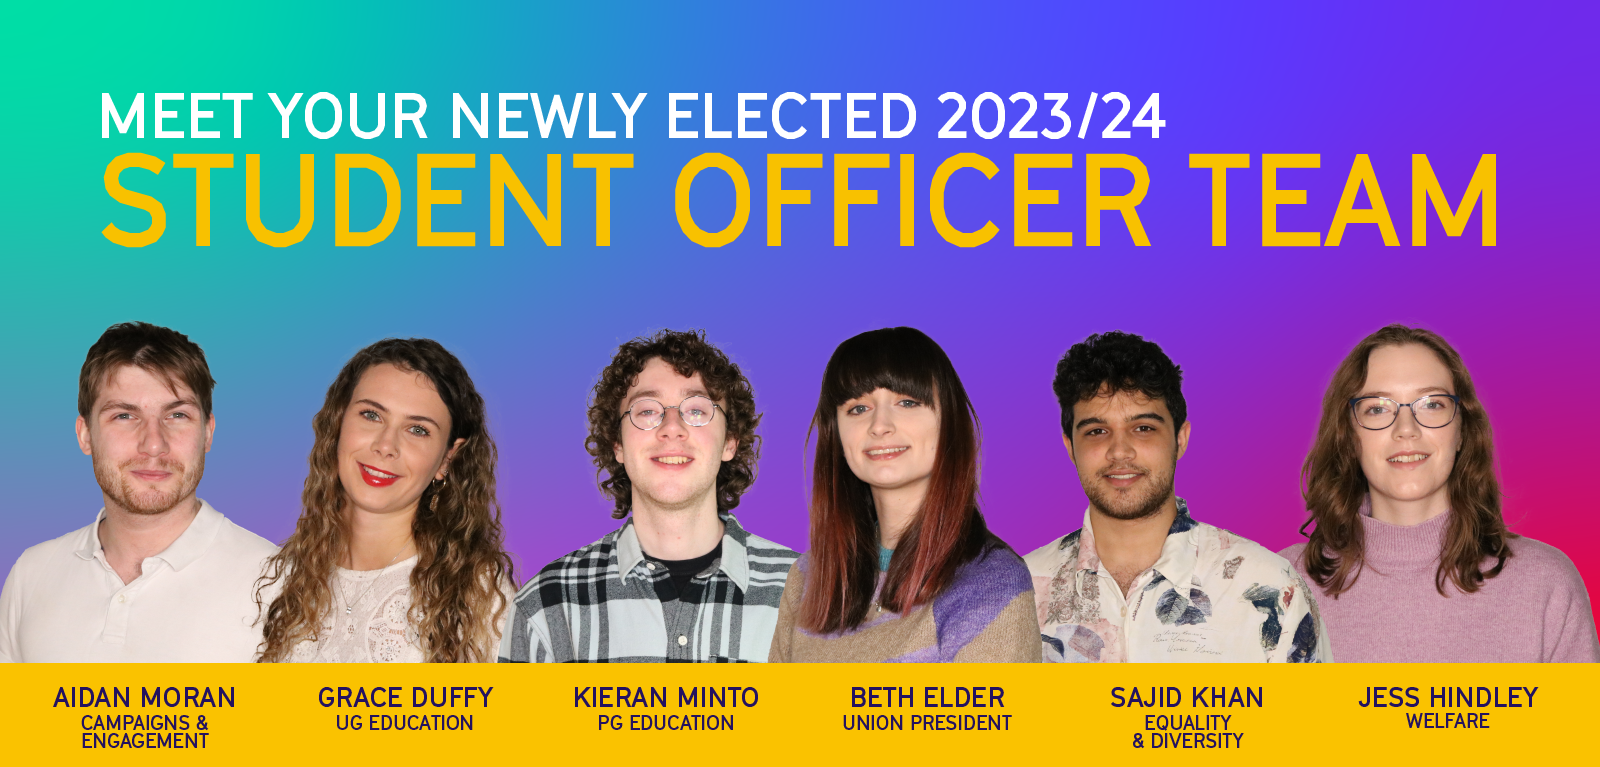 Students' Union Elections - Login to Vote